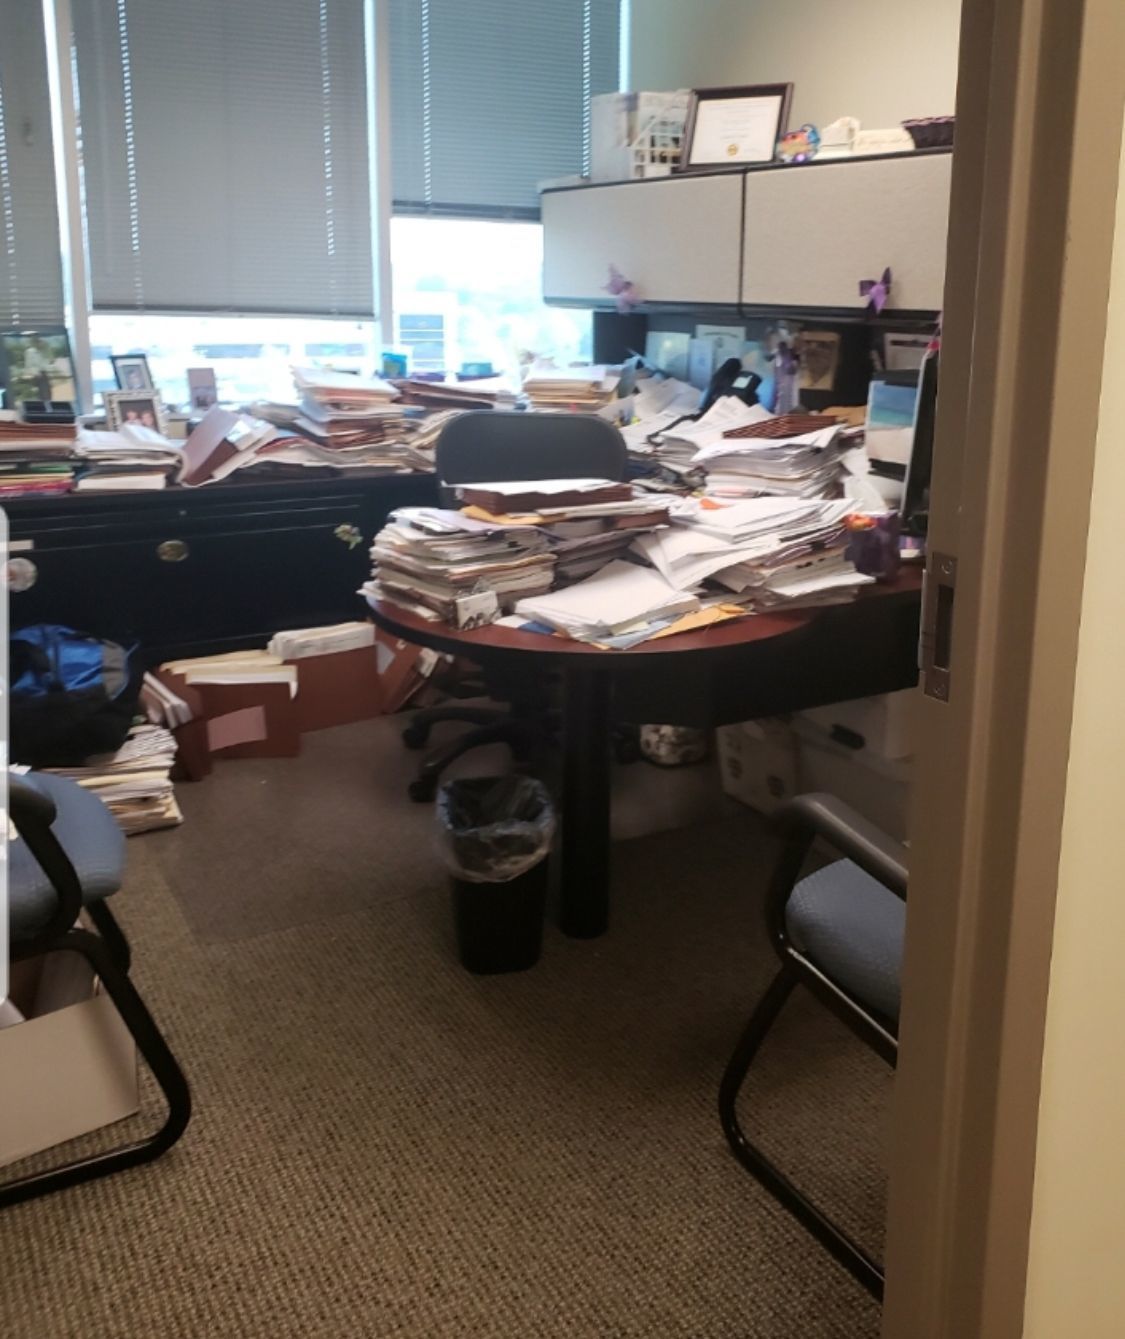 Va Agency S Human Resources Director Tidying Up After Photo